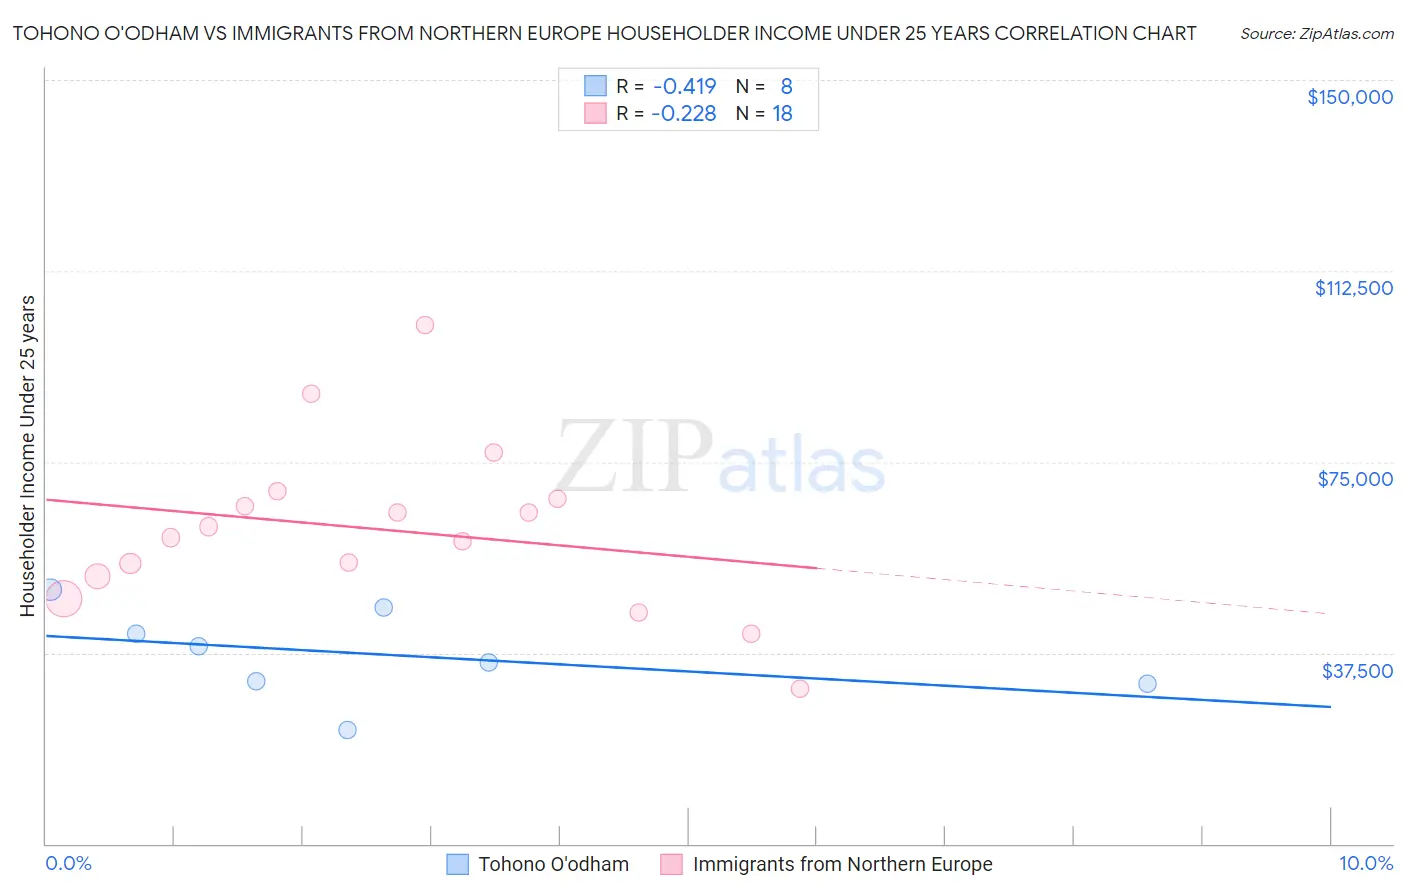 Tohono O'odham vs Immigrants from Northern Europe Householder Income Under 25 years